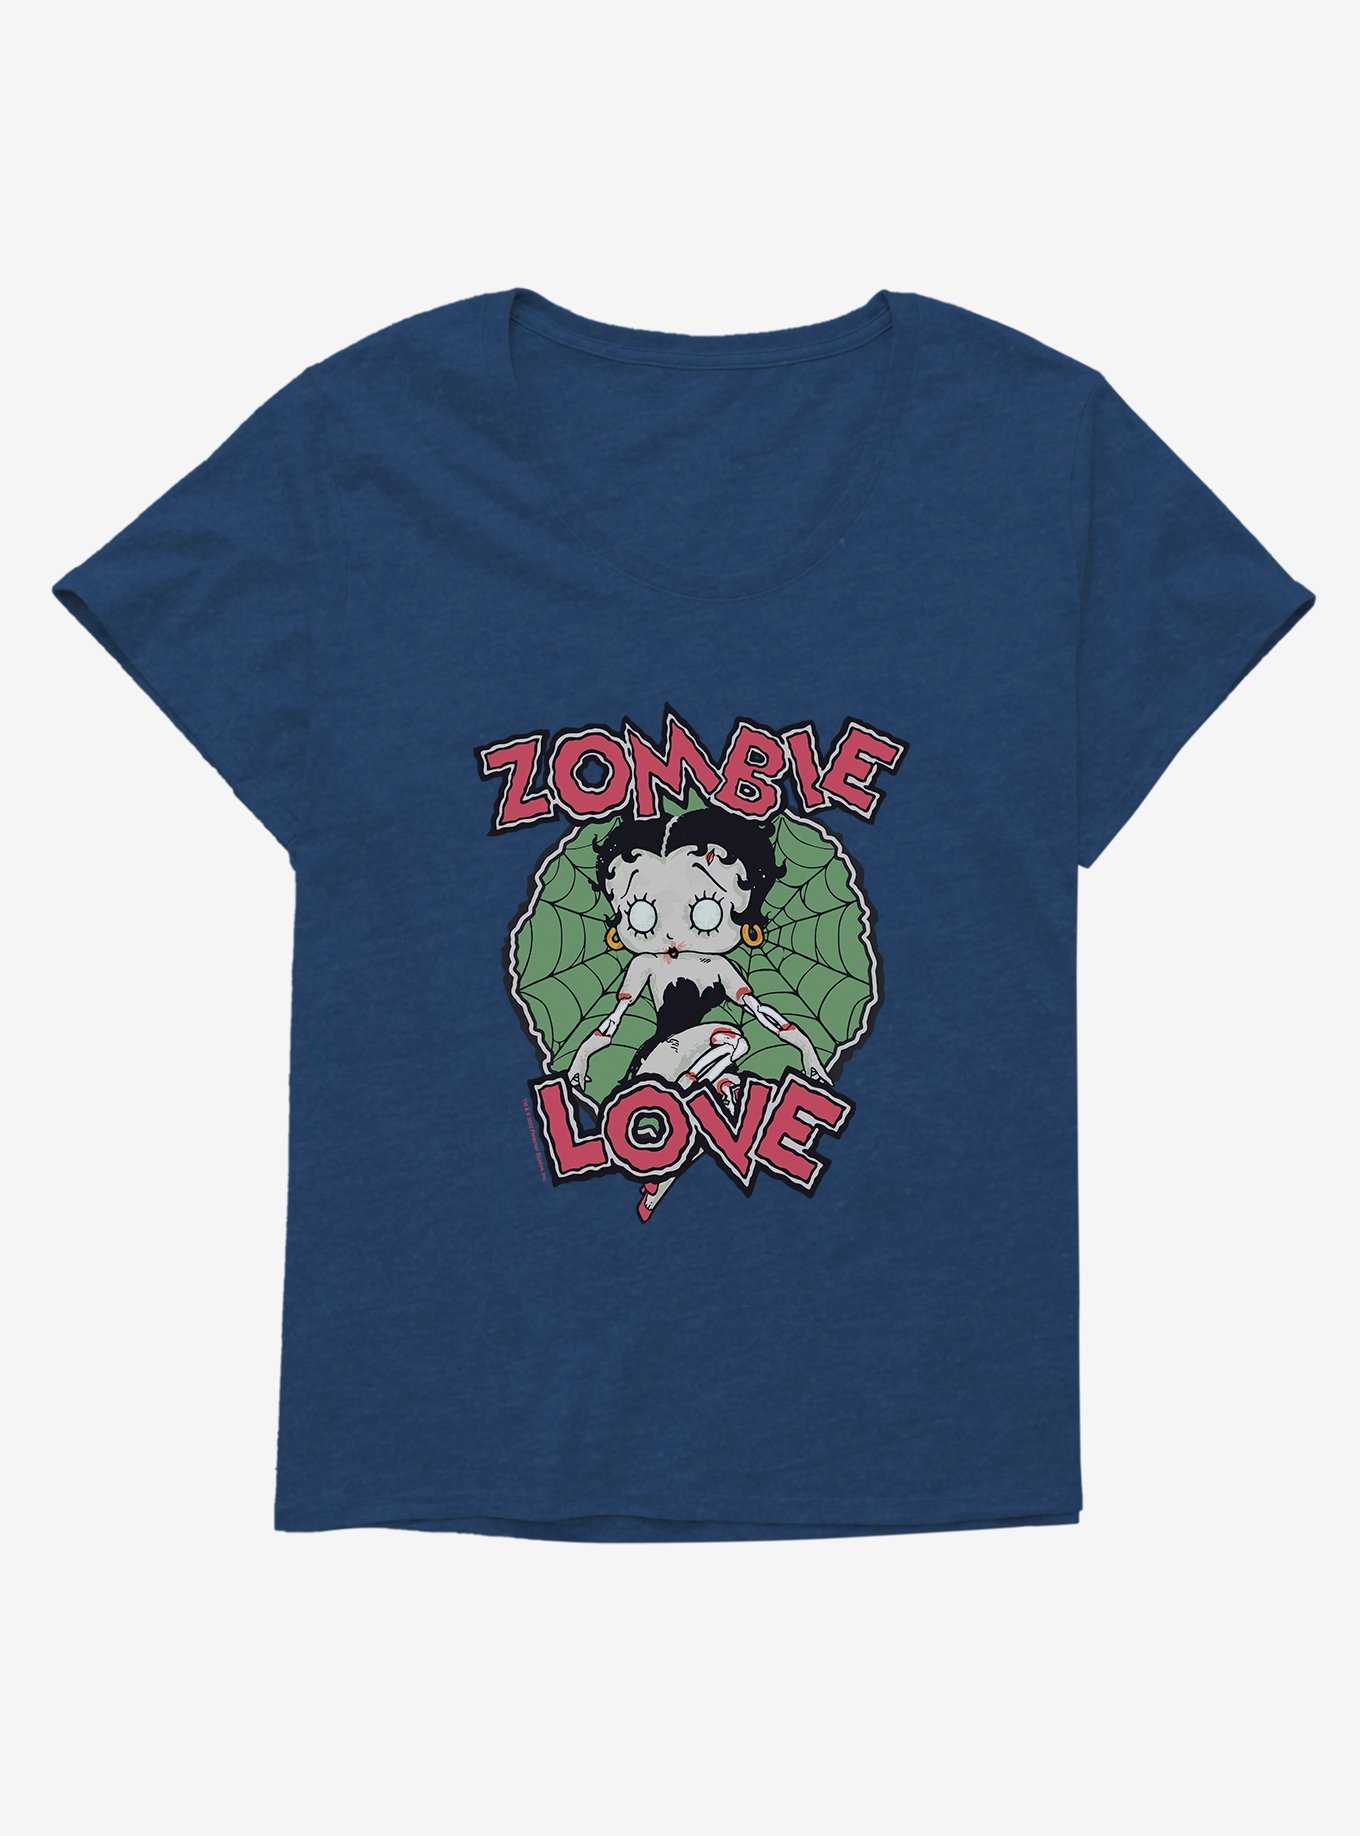 Betty Boop Zombie Love Girls T-Shirt Plus Size, ATHLETIC NAVY, hi-res